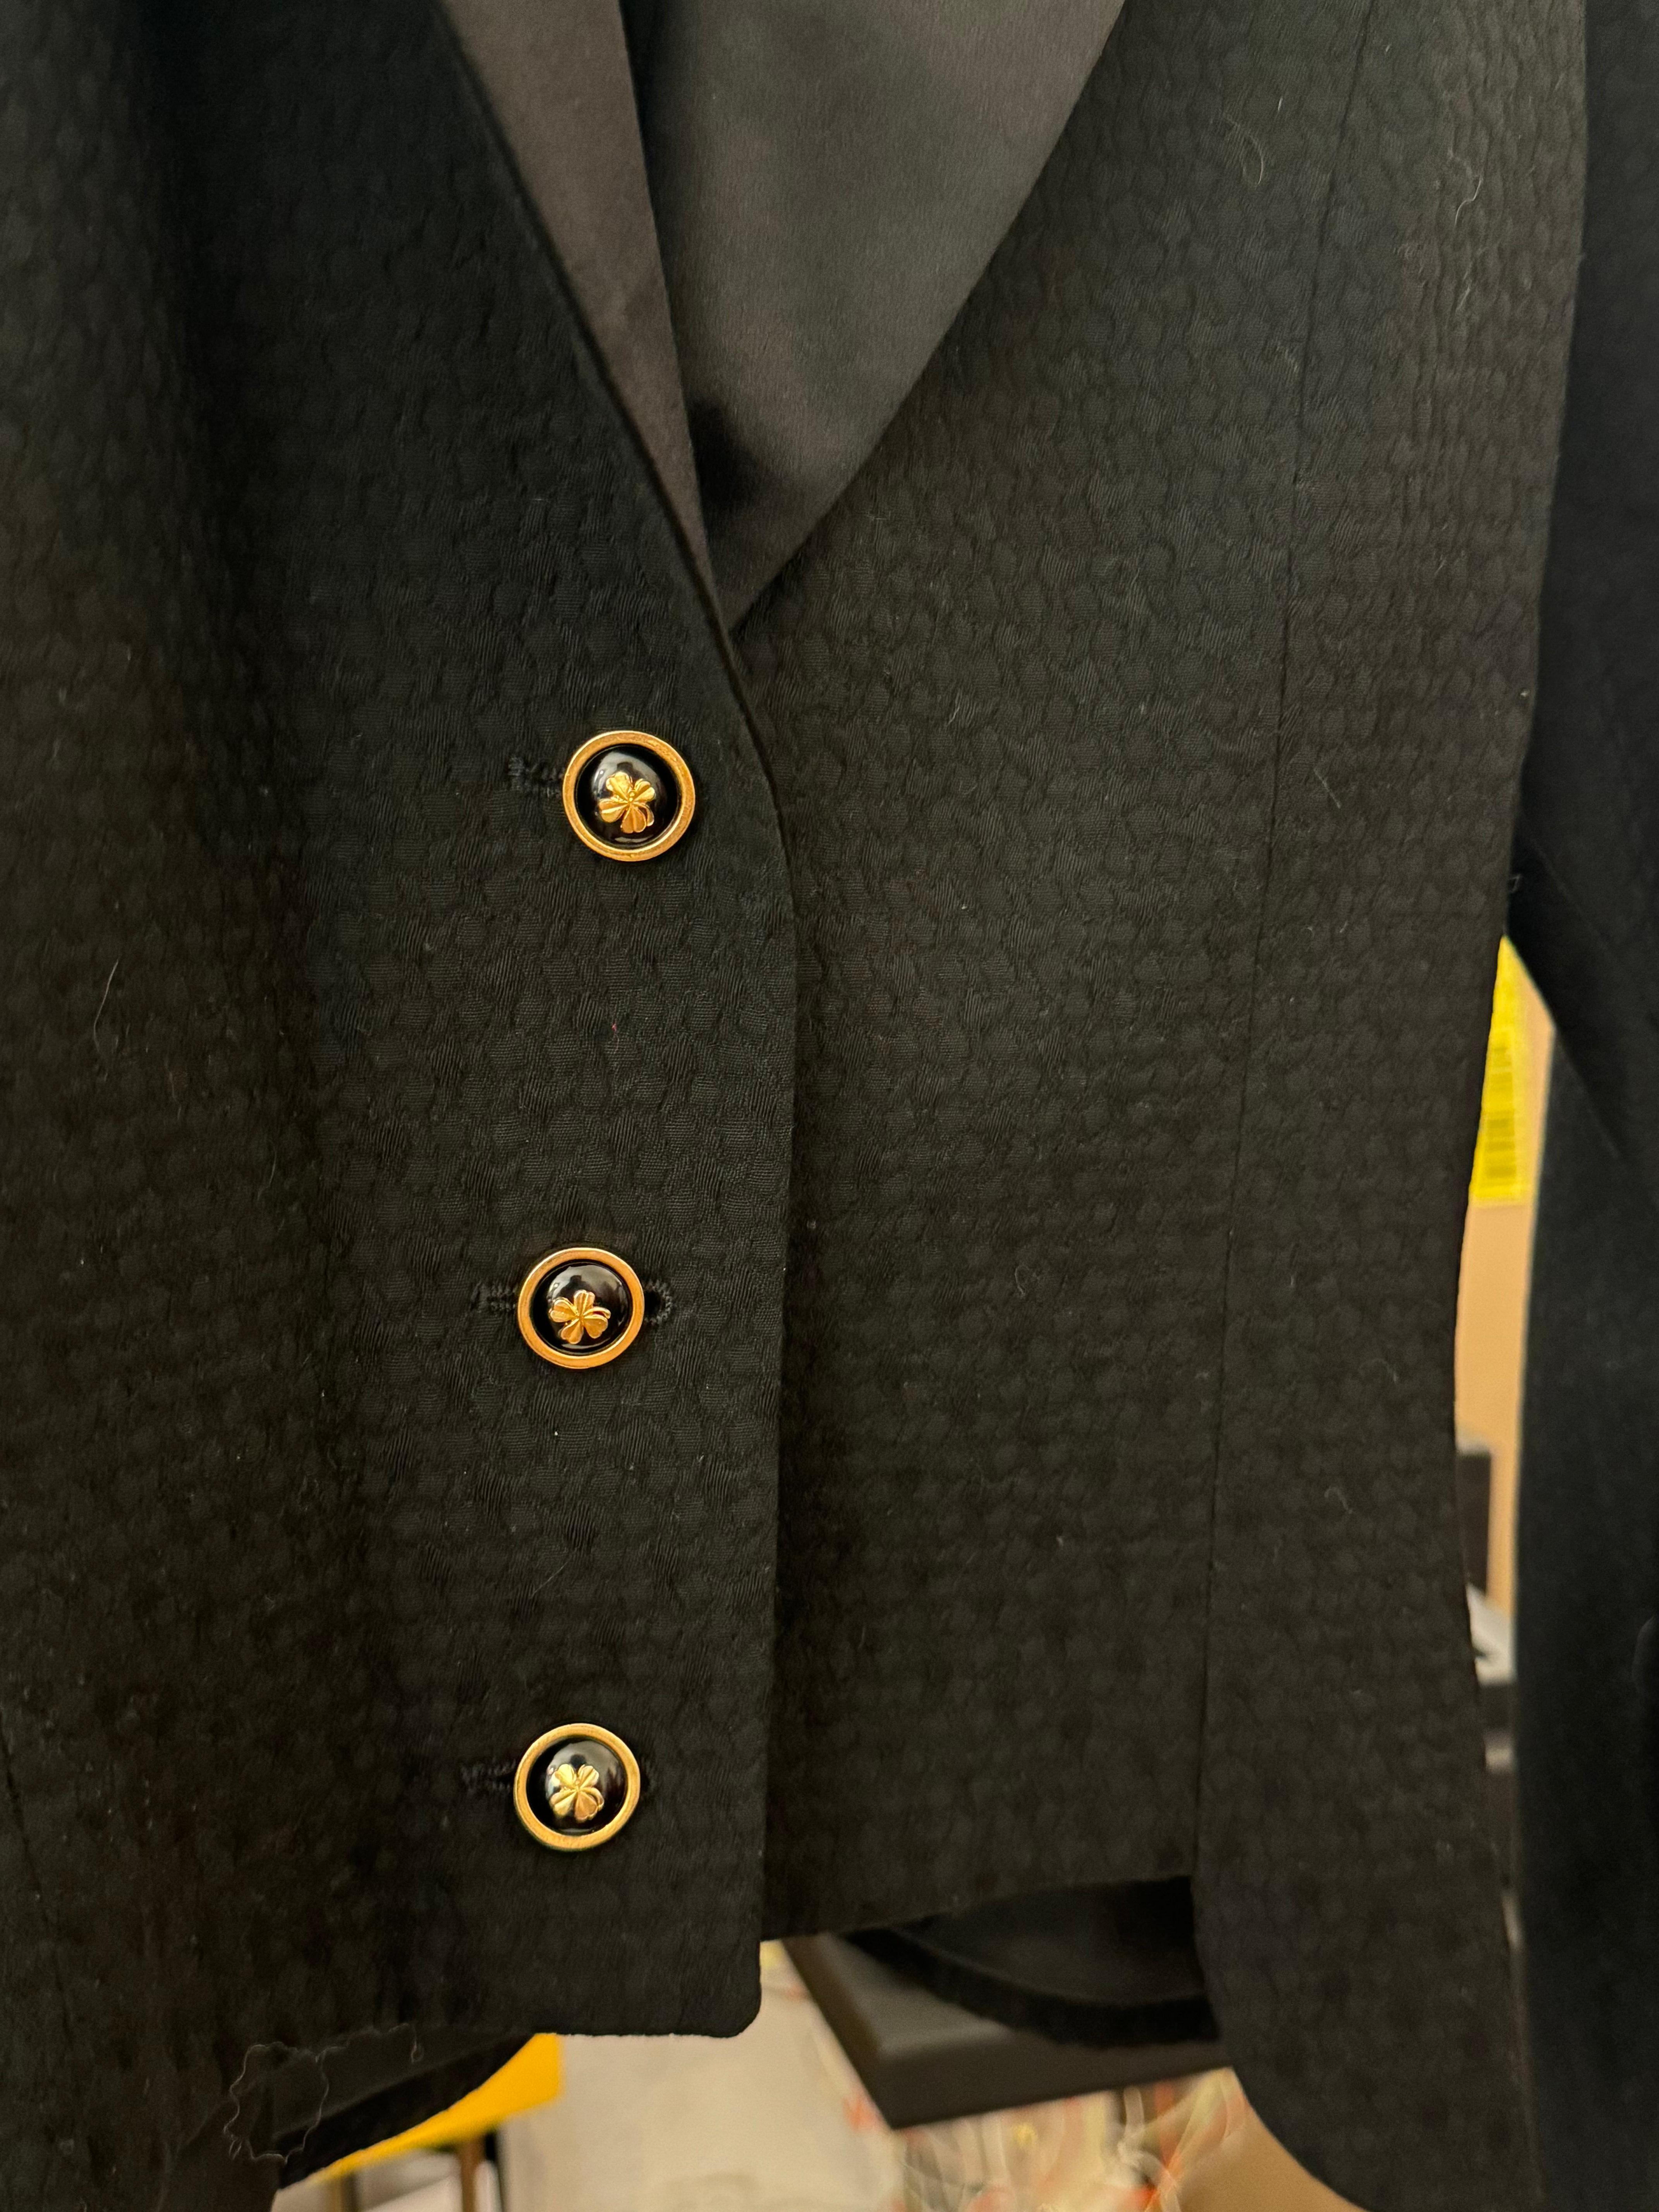 Rare Chanel 1988 smoking wool jacket with satin collar and 24k gold plated clover gold and black size 40 FR